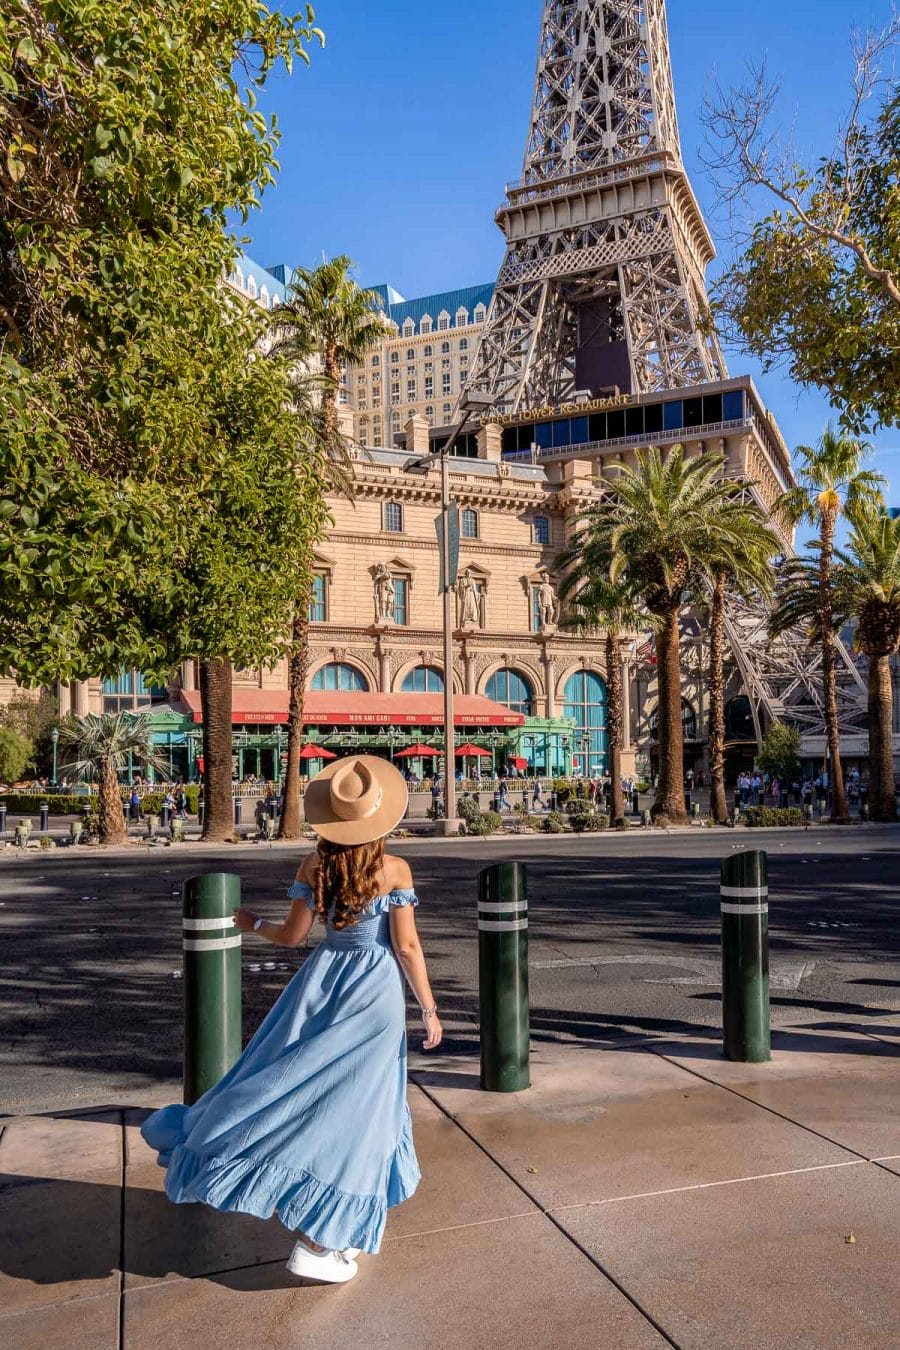 Girl in white dress in front of the Eiffel Tower at Paris Las Vegas